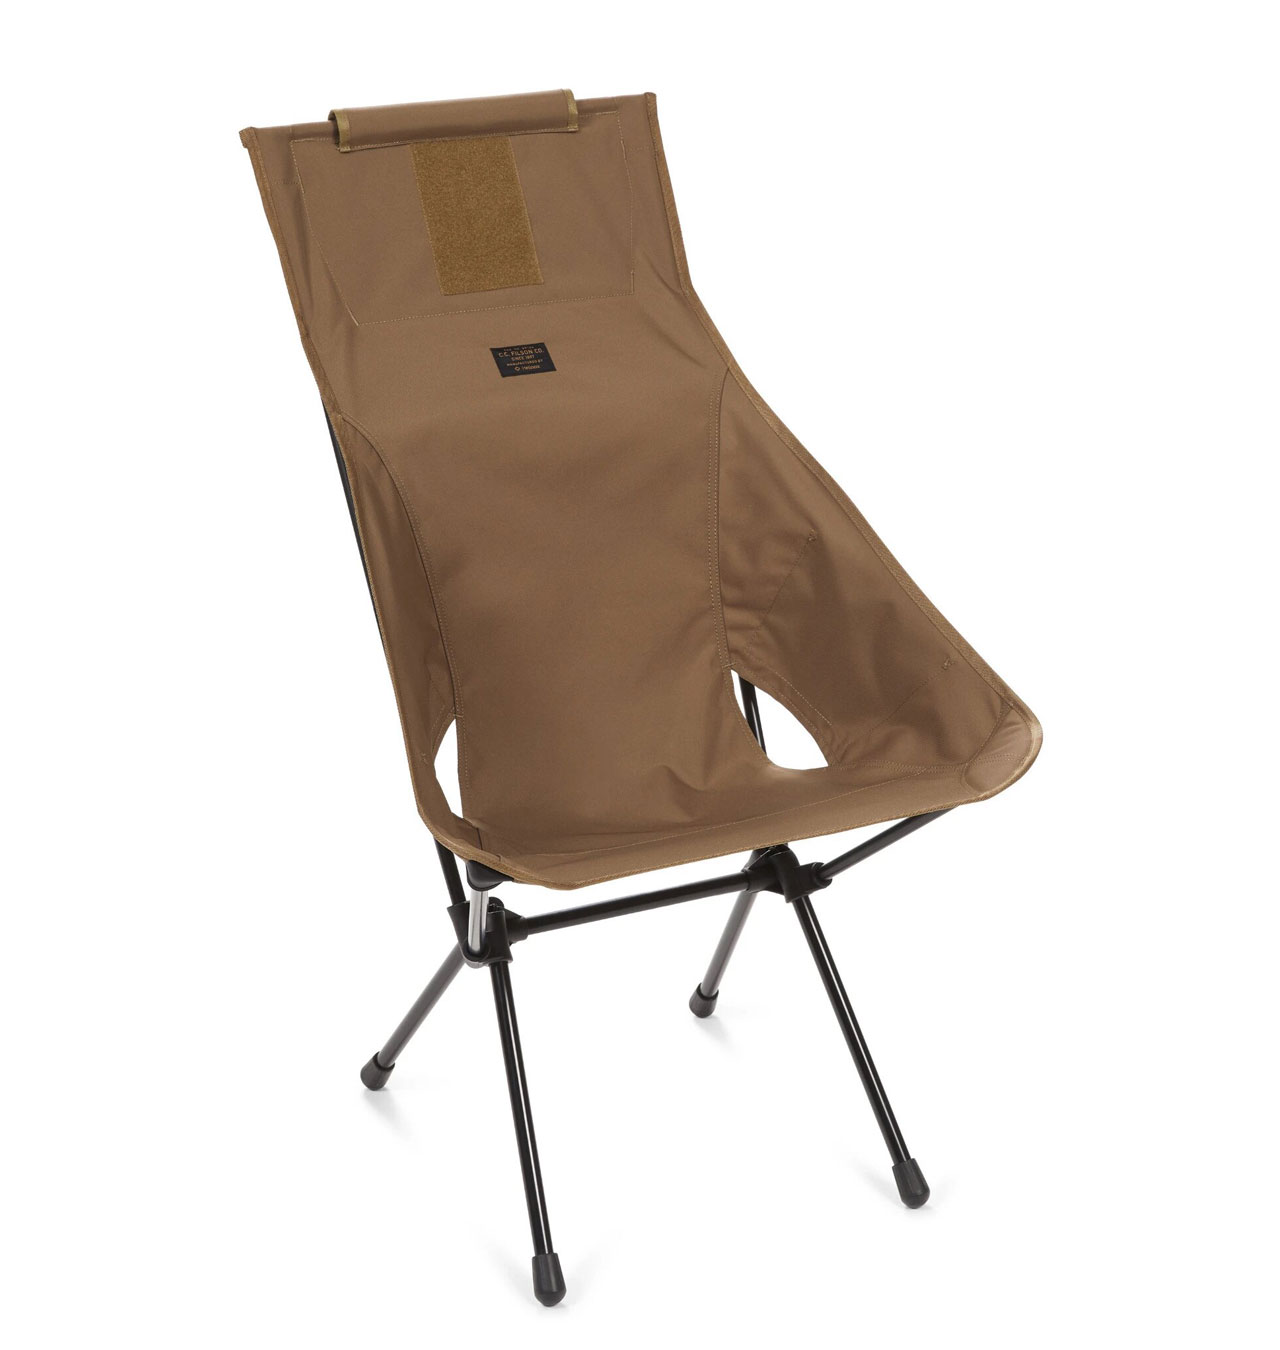 Filson-x-Helinox---Solid-Tactical-Sunset-Chair---Coyote-Tan-1